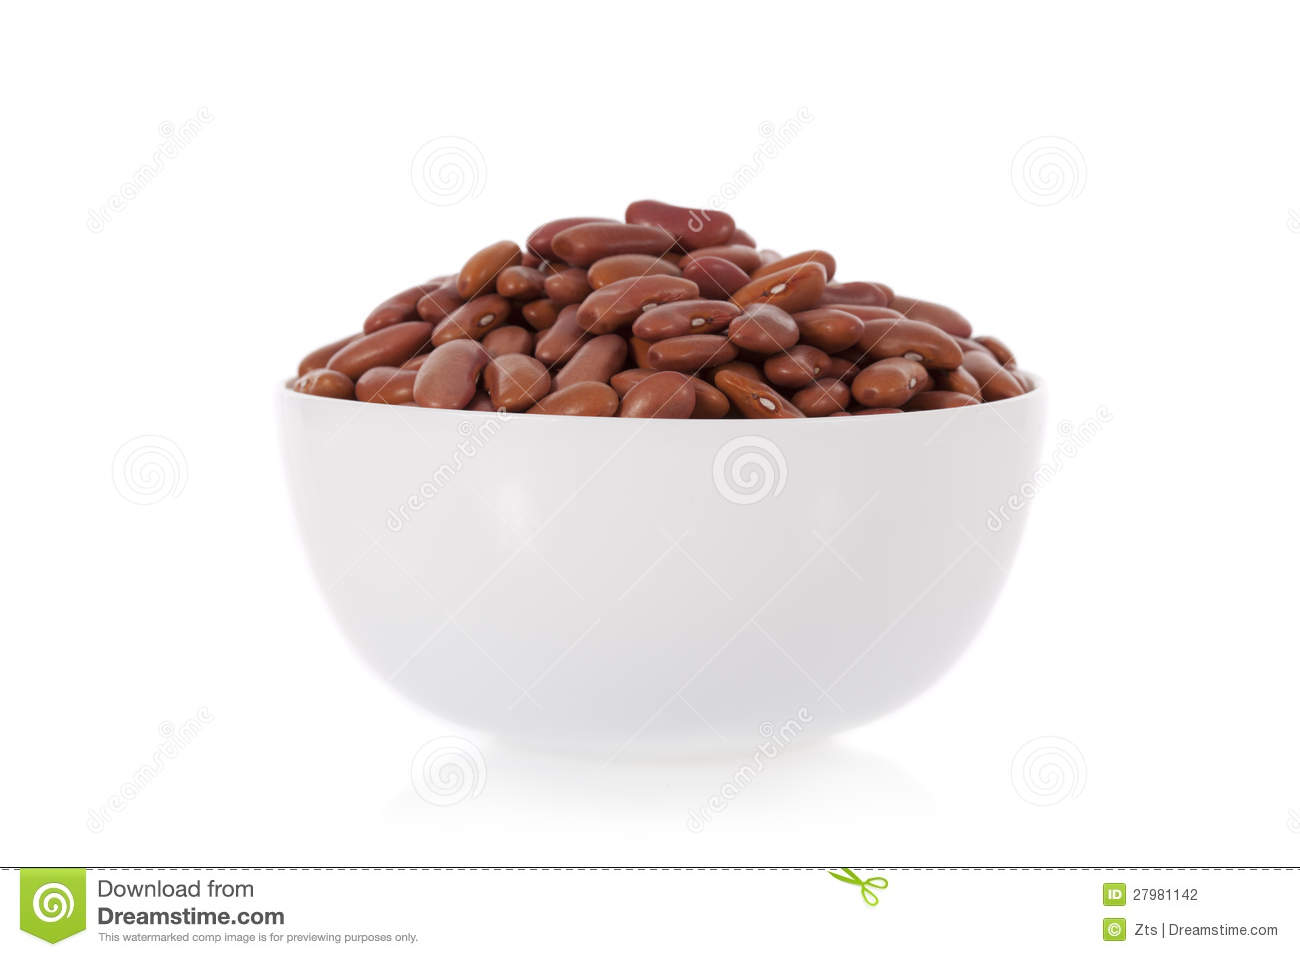 Kidney Beans Clipart Red Kidney Beans In A Bowl On